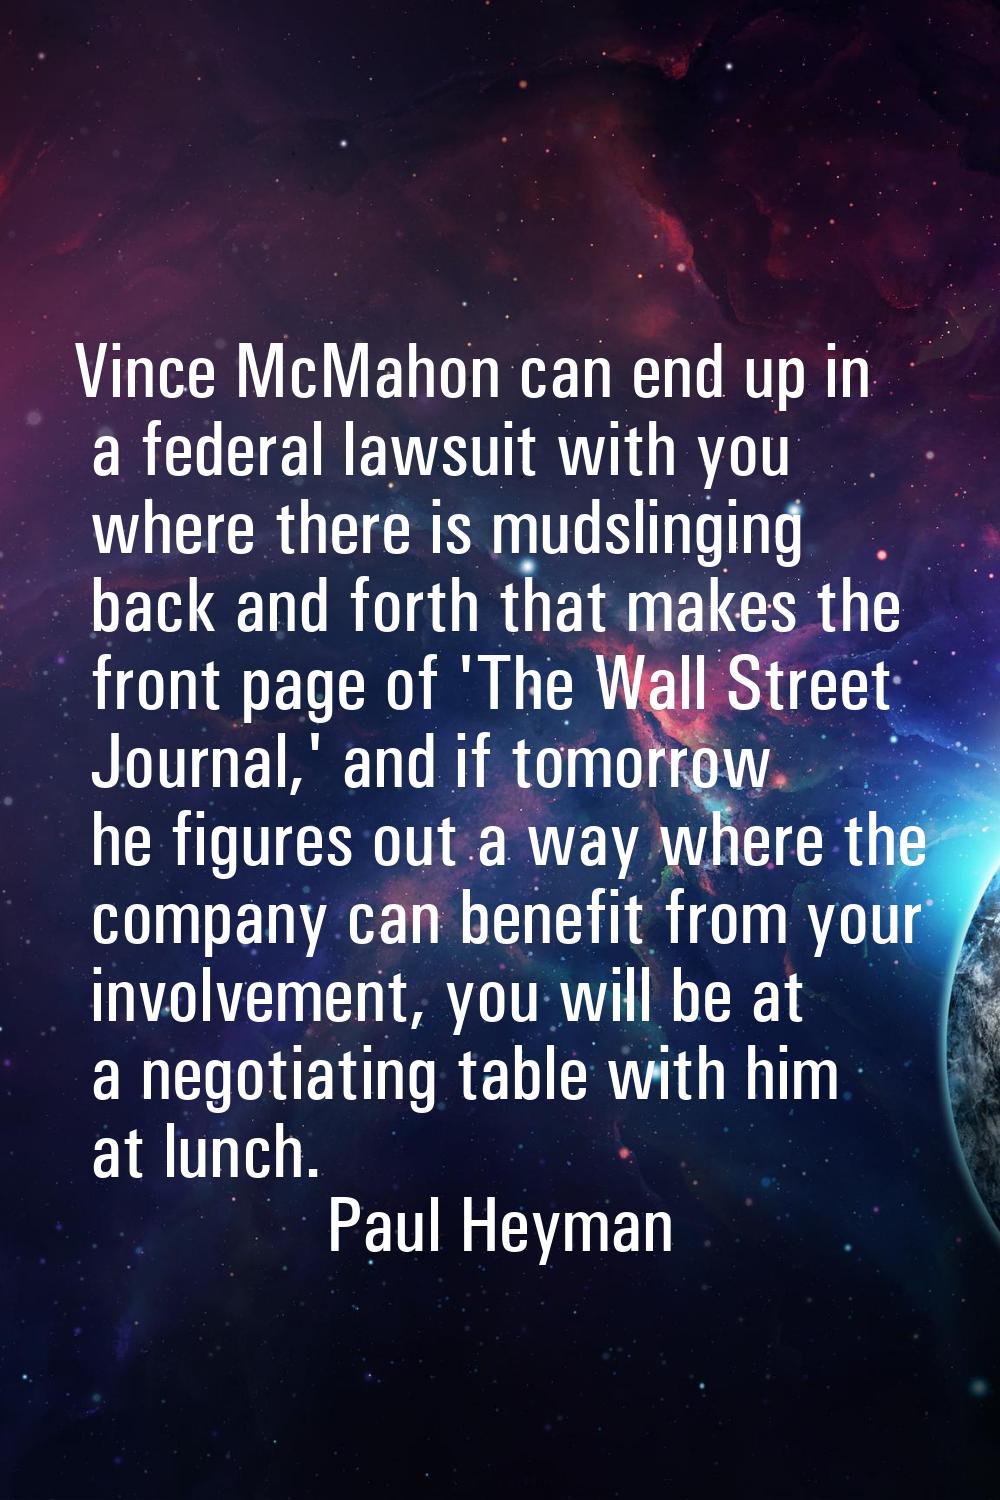 Vince McMahon can end up in a federal lawsuit with you where there is mudslinging back and forth th